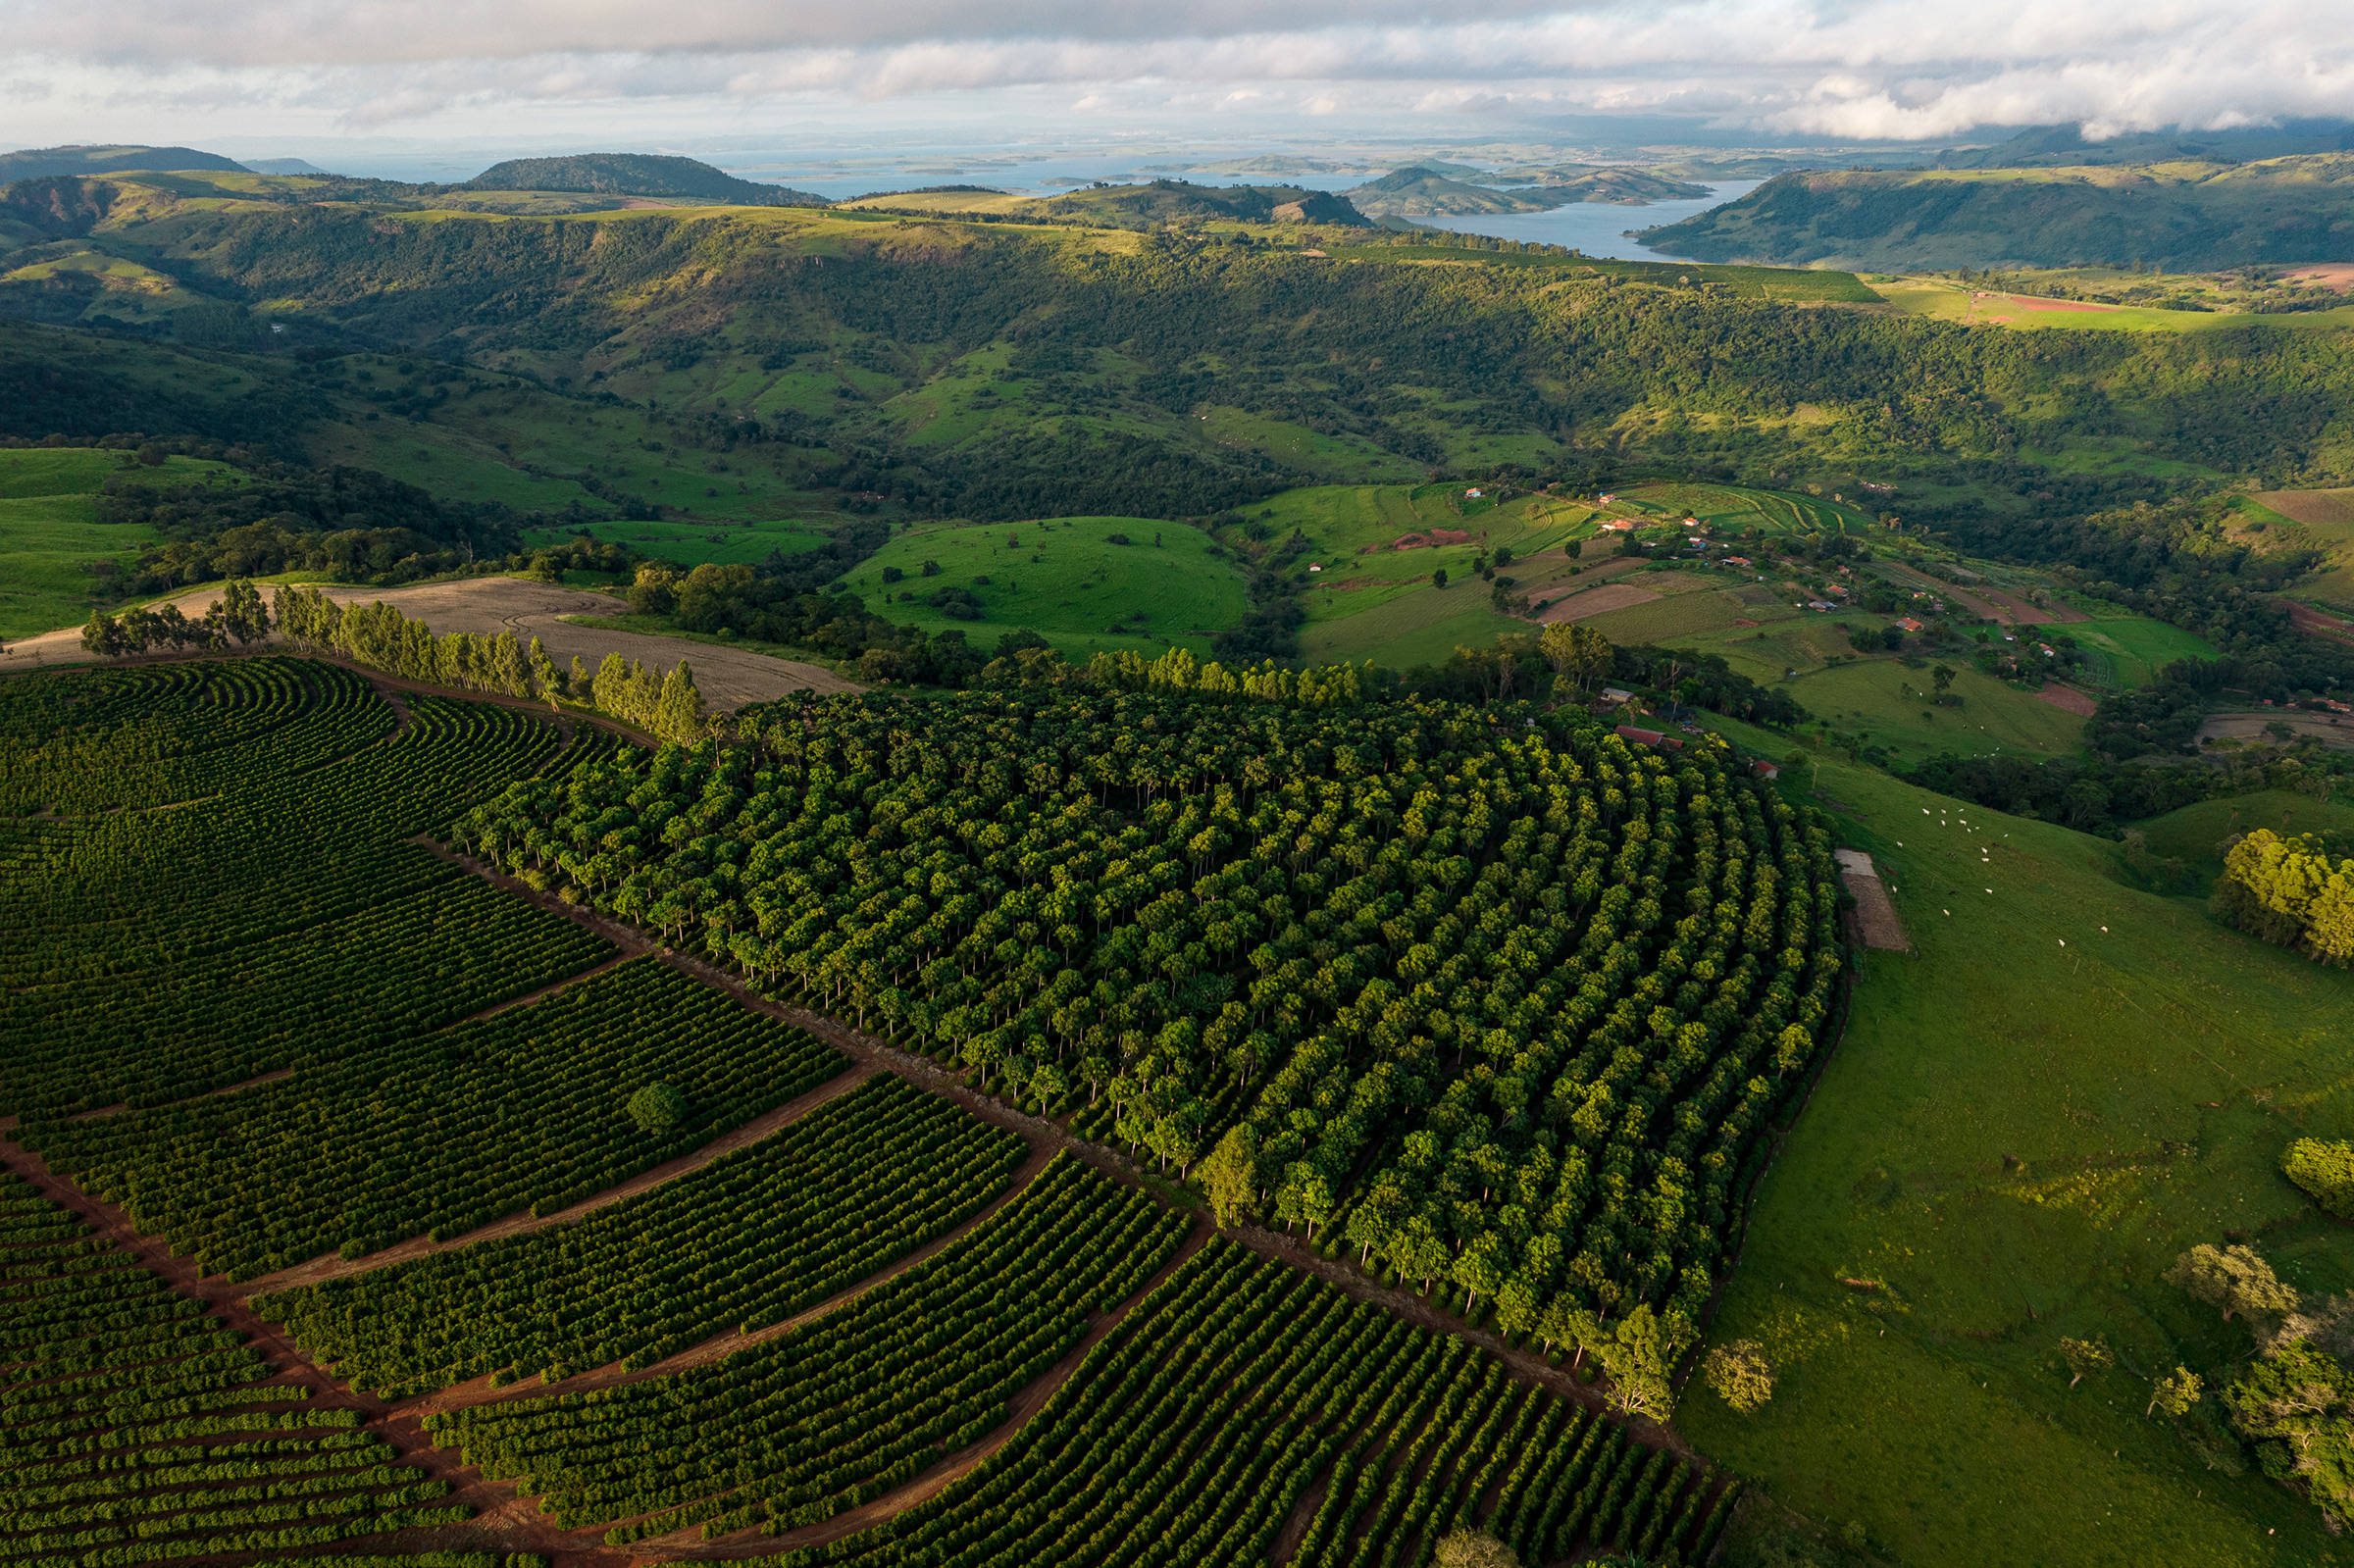 Aerial view of a plantation that implemented the agroforestry concept developed by the Preta Terra project in Timburi. (Victor Moriyama for TIME)